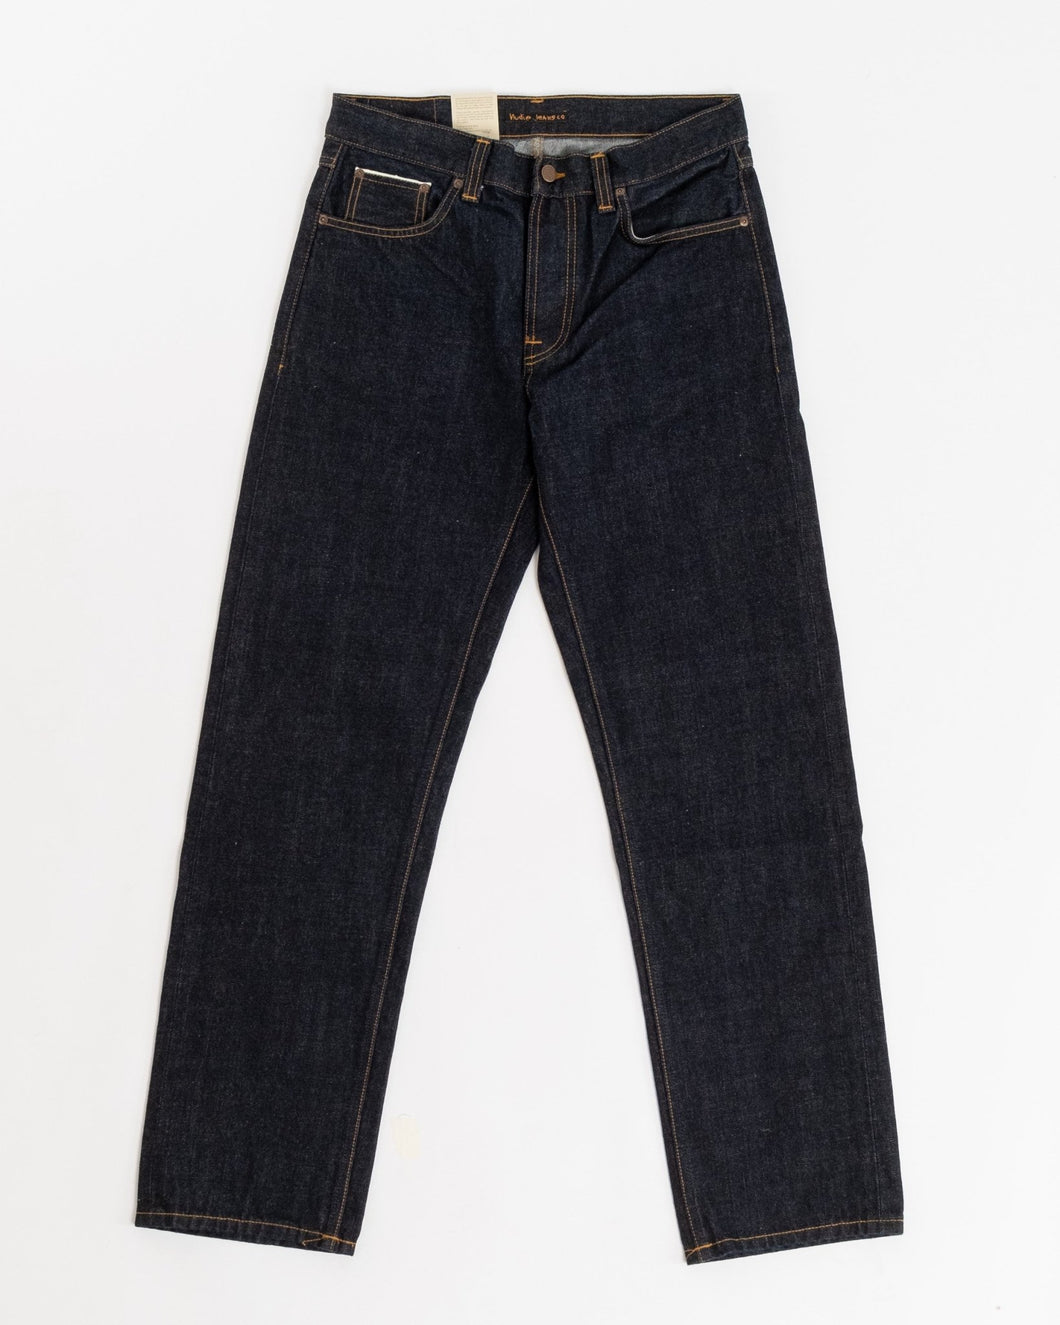 Rad Rufus Rinse Ruby Selvage - Meadow